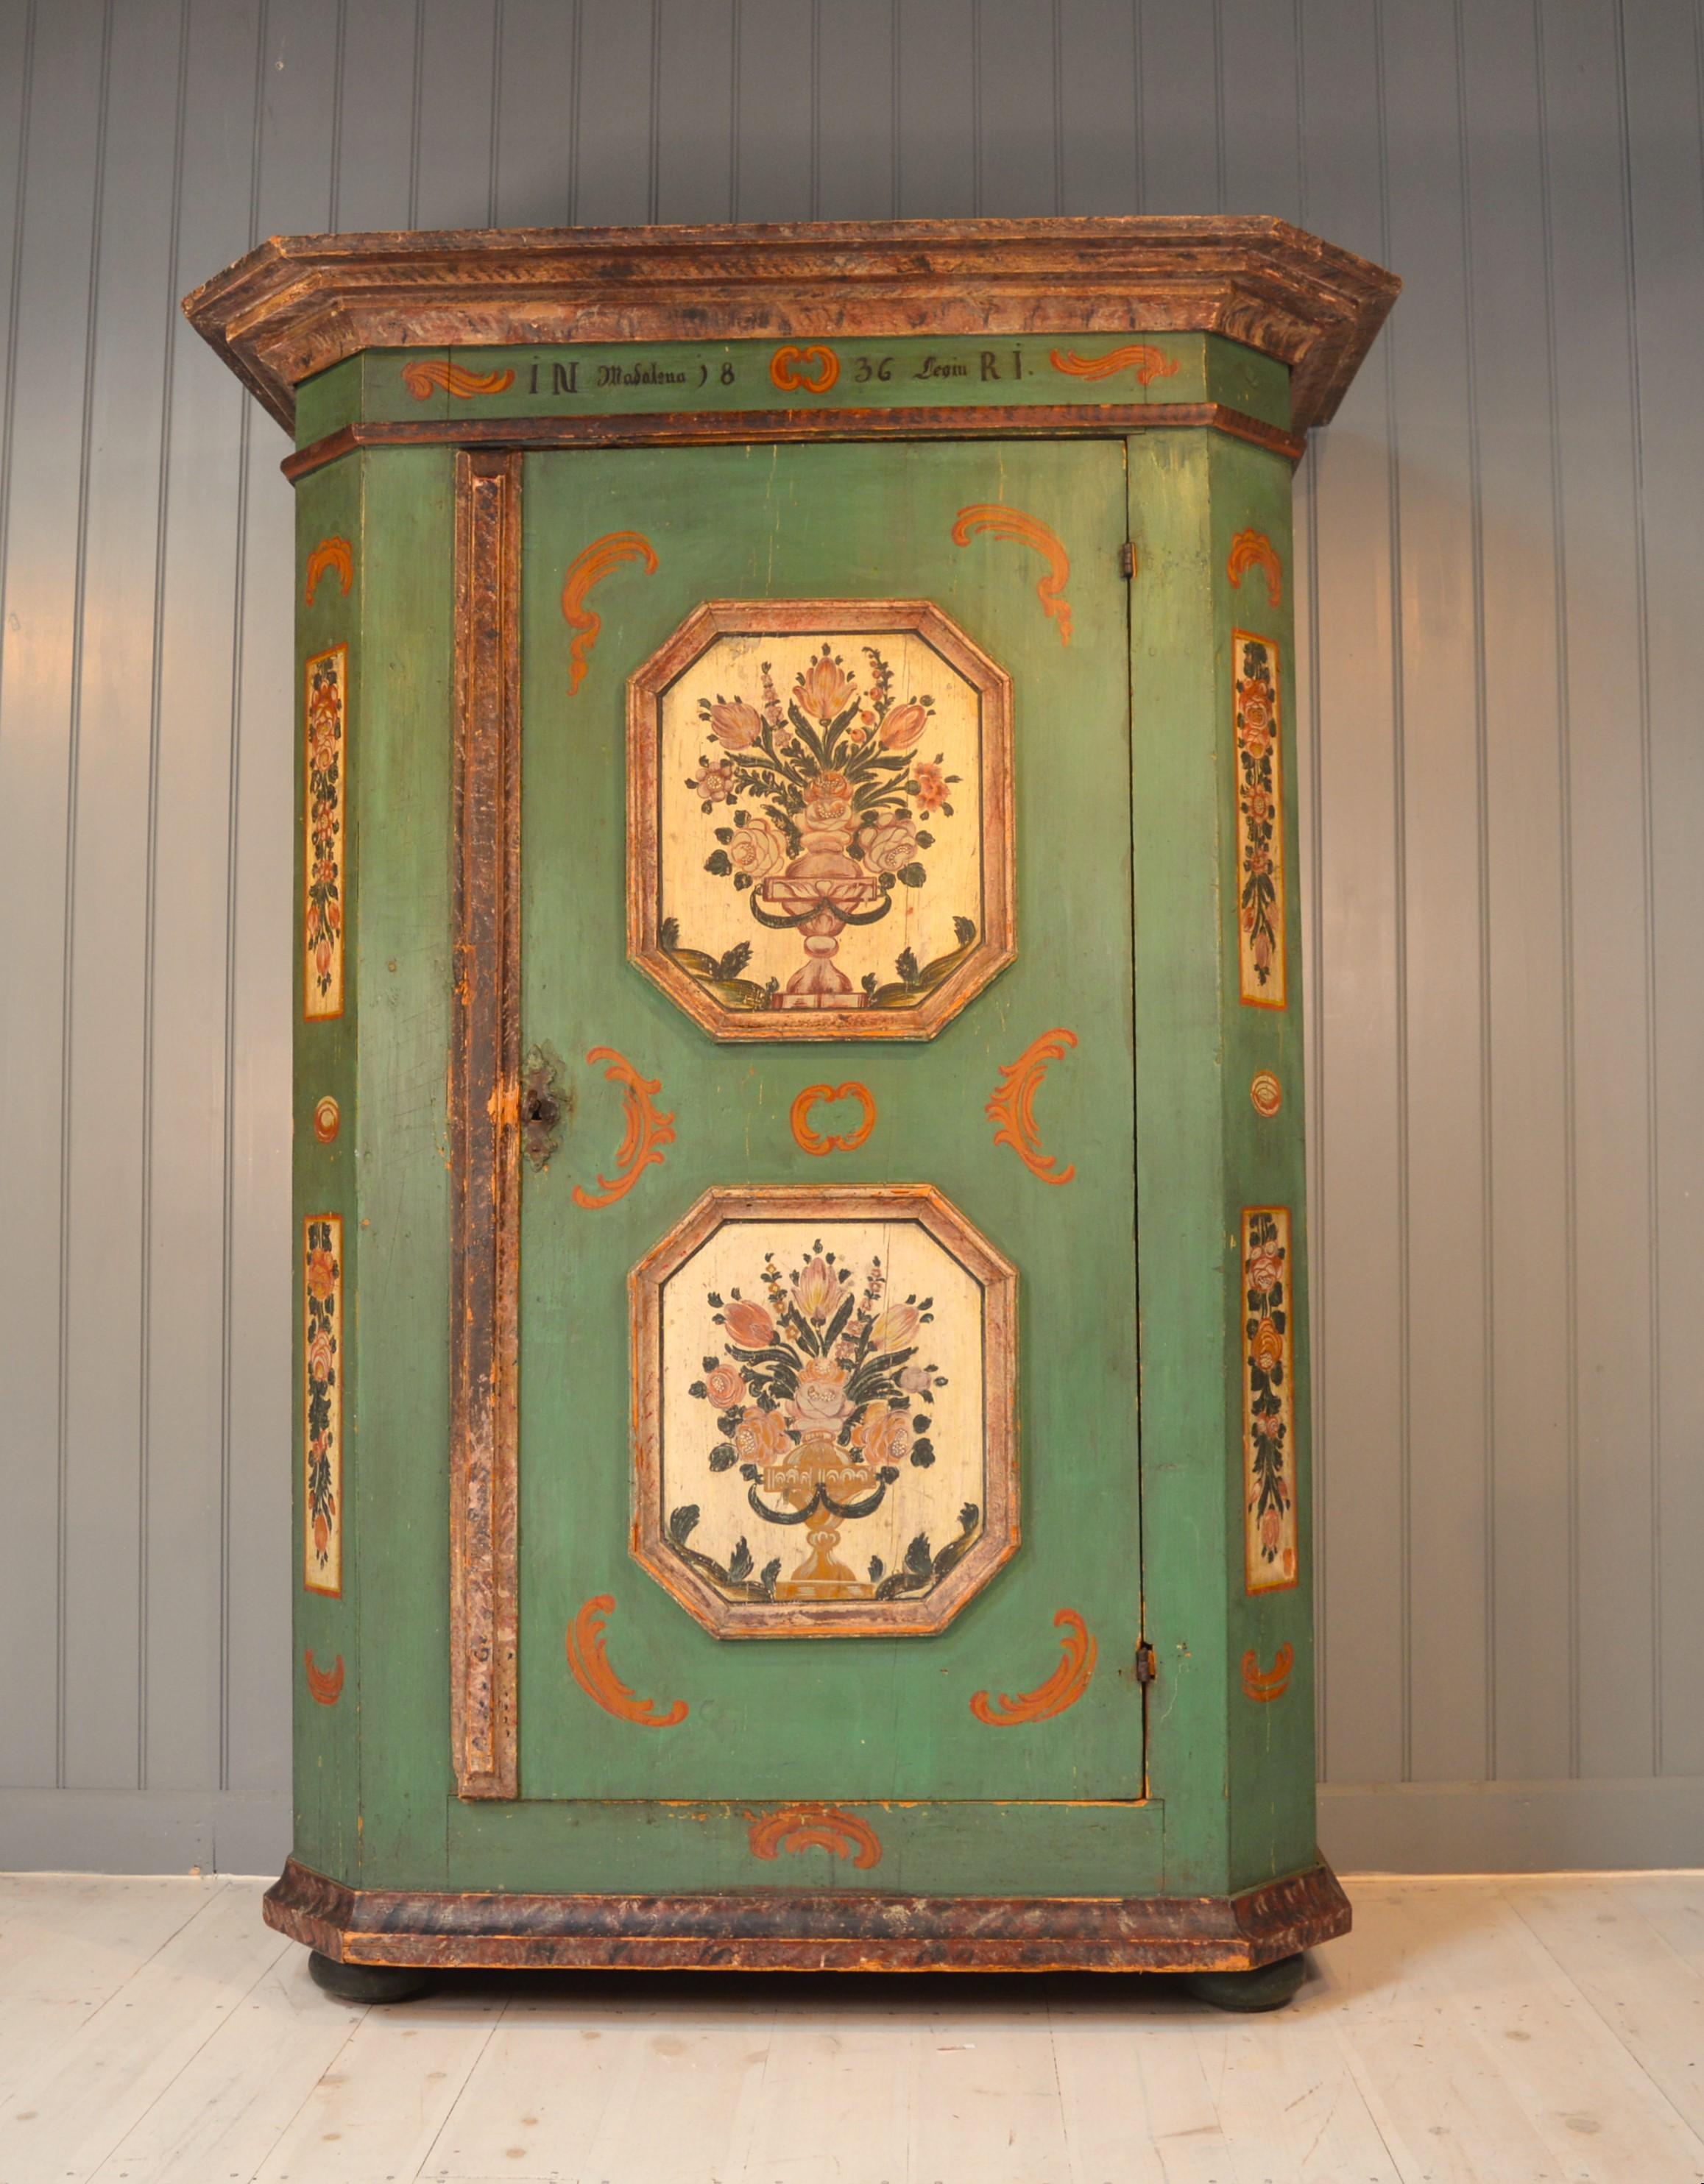 Here we have a very good painted cupboard in untouched condition in original green paint ,with floral panels very typical of the area. The cupboard originates from the Tyrol and has its original hinges lock and key and turned feet. It has a